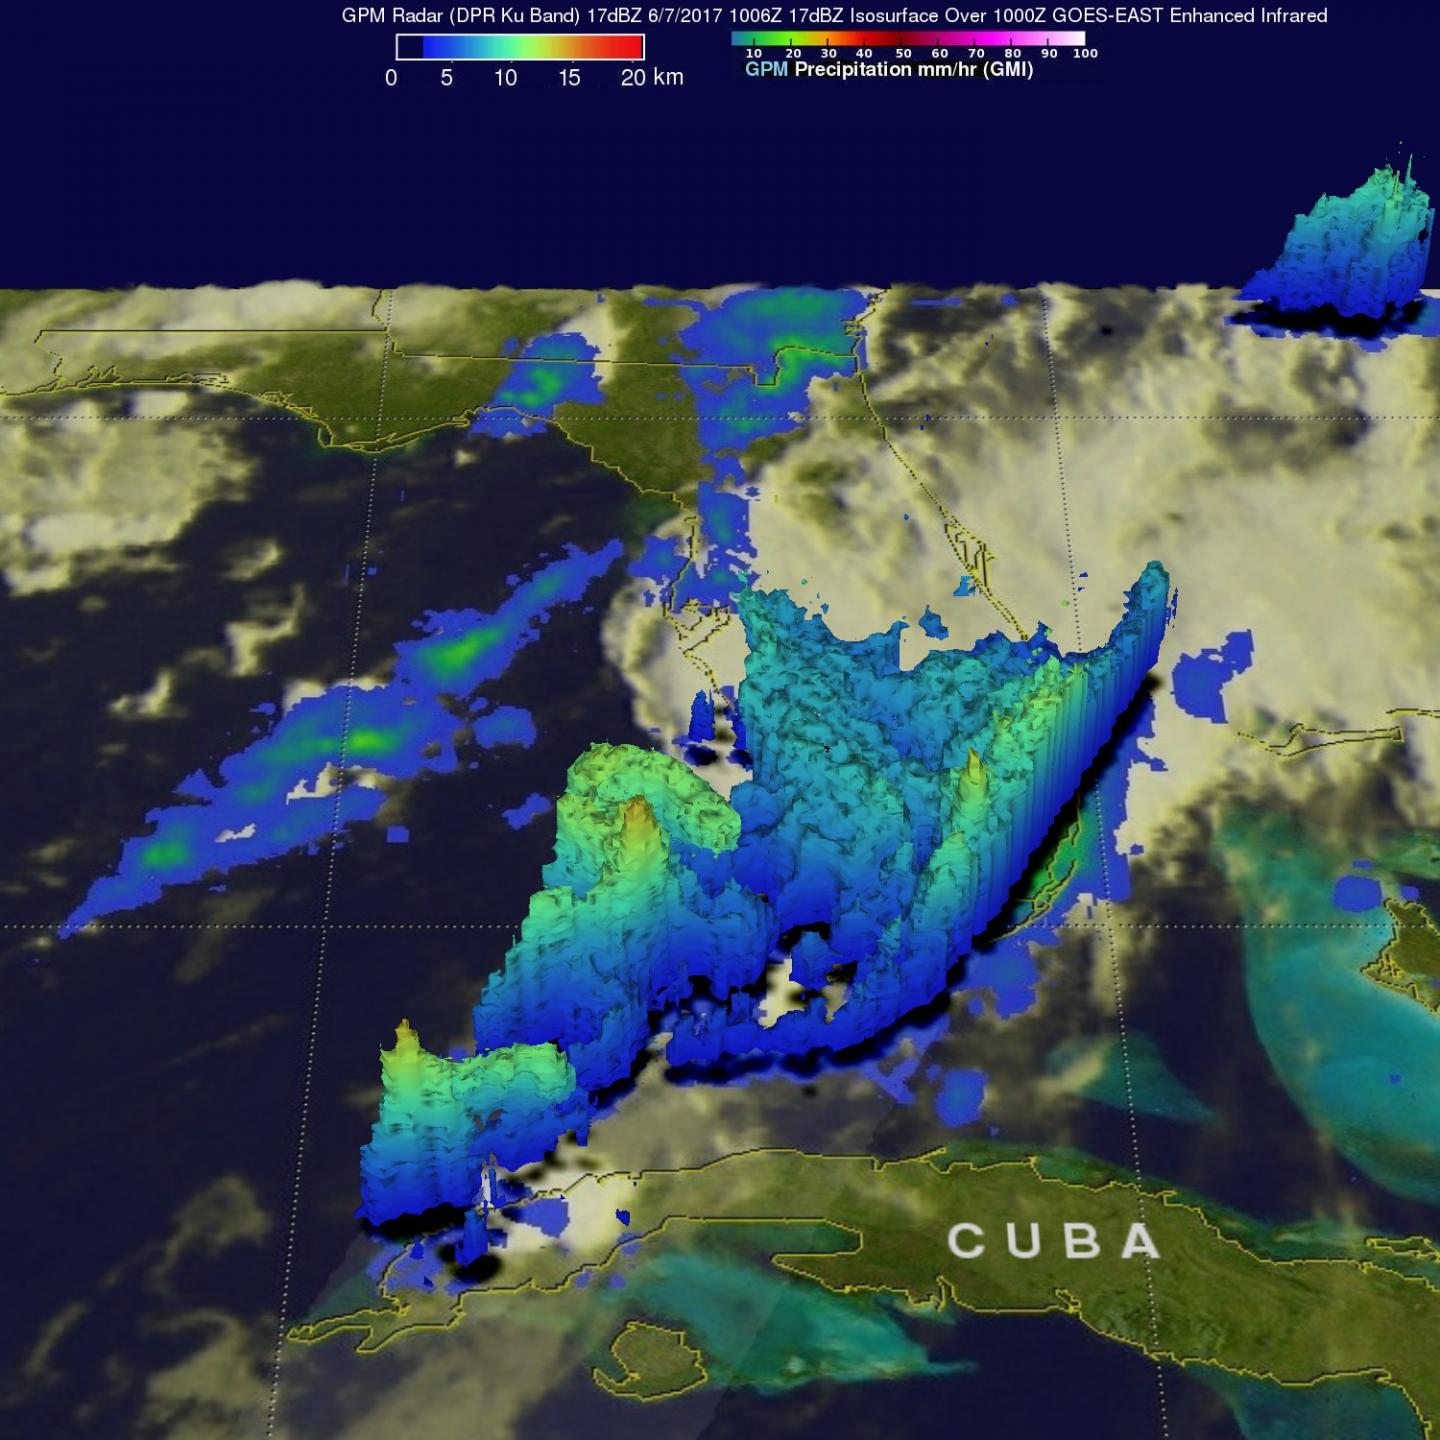 GPM View of Rainfall Over Florida